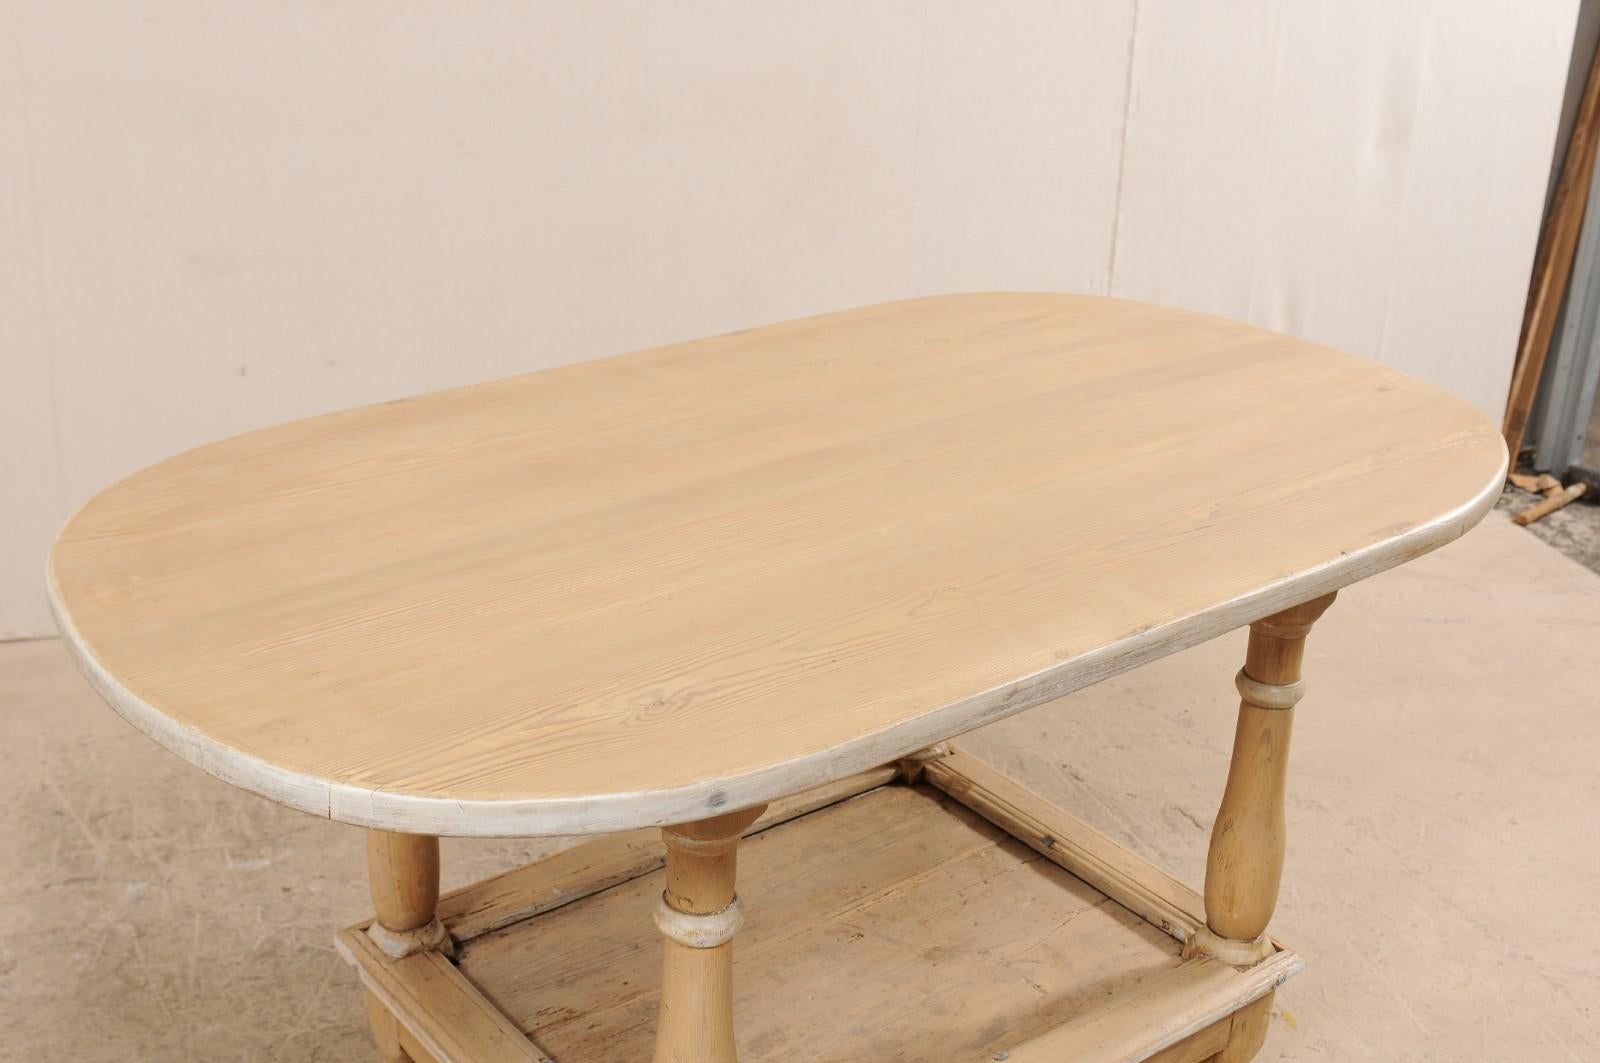 An Early 19th Century Swedish Bleached & Painted Wood Two-Tier Oval Table For Sale 6